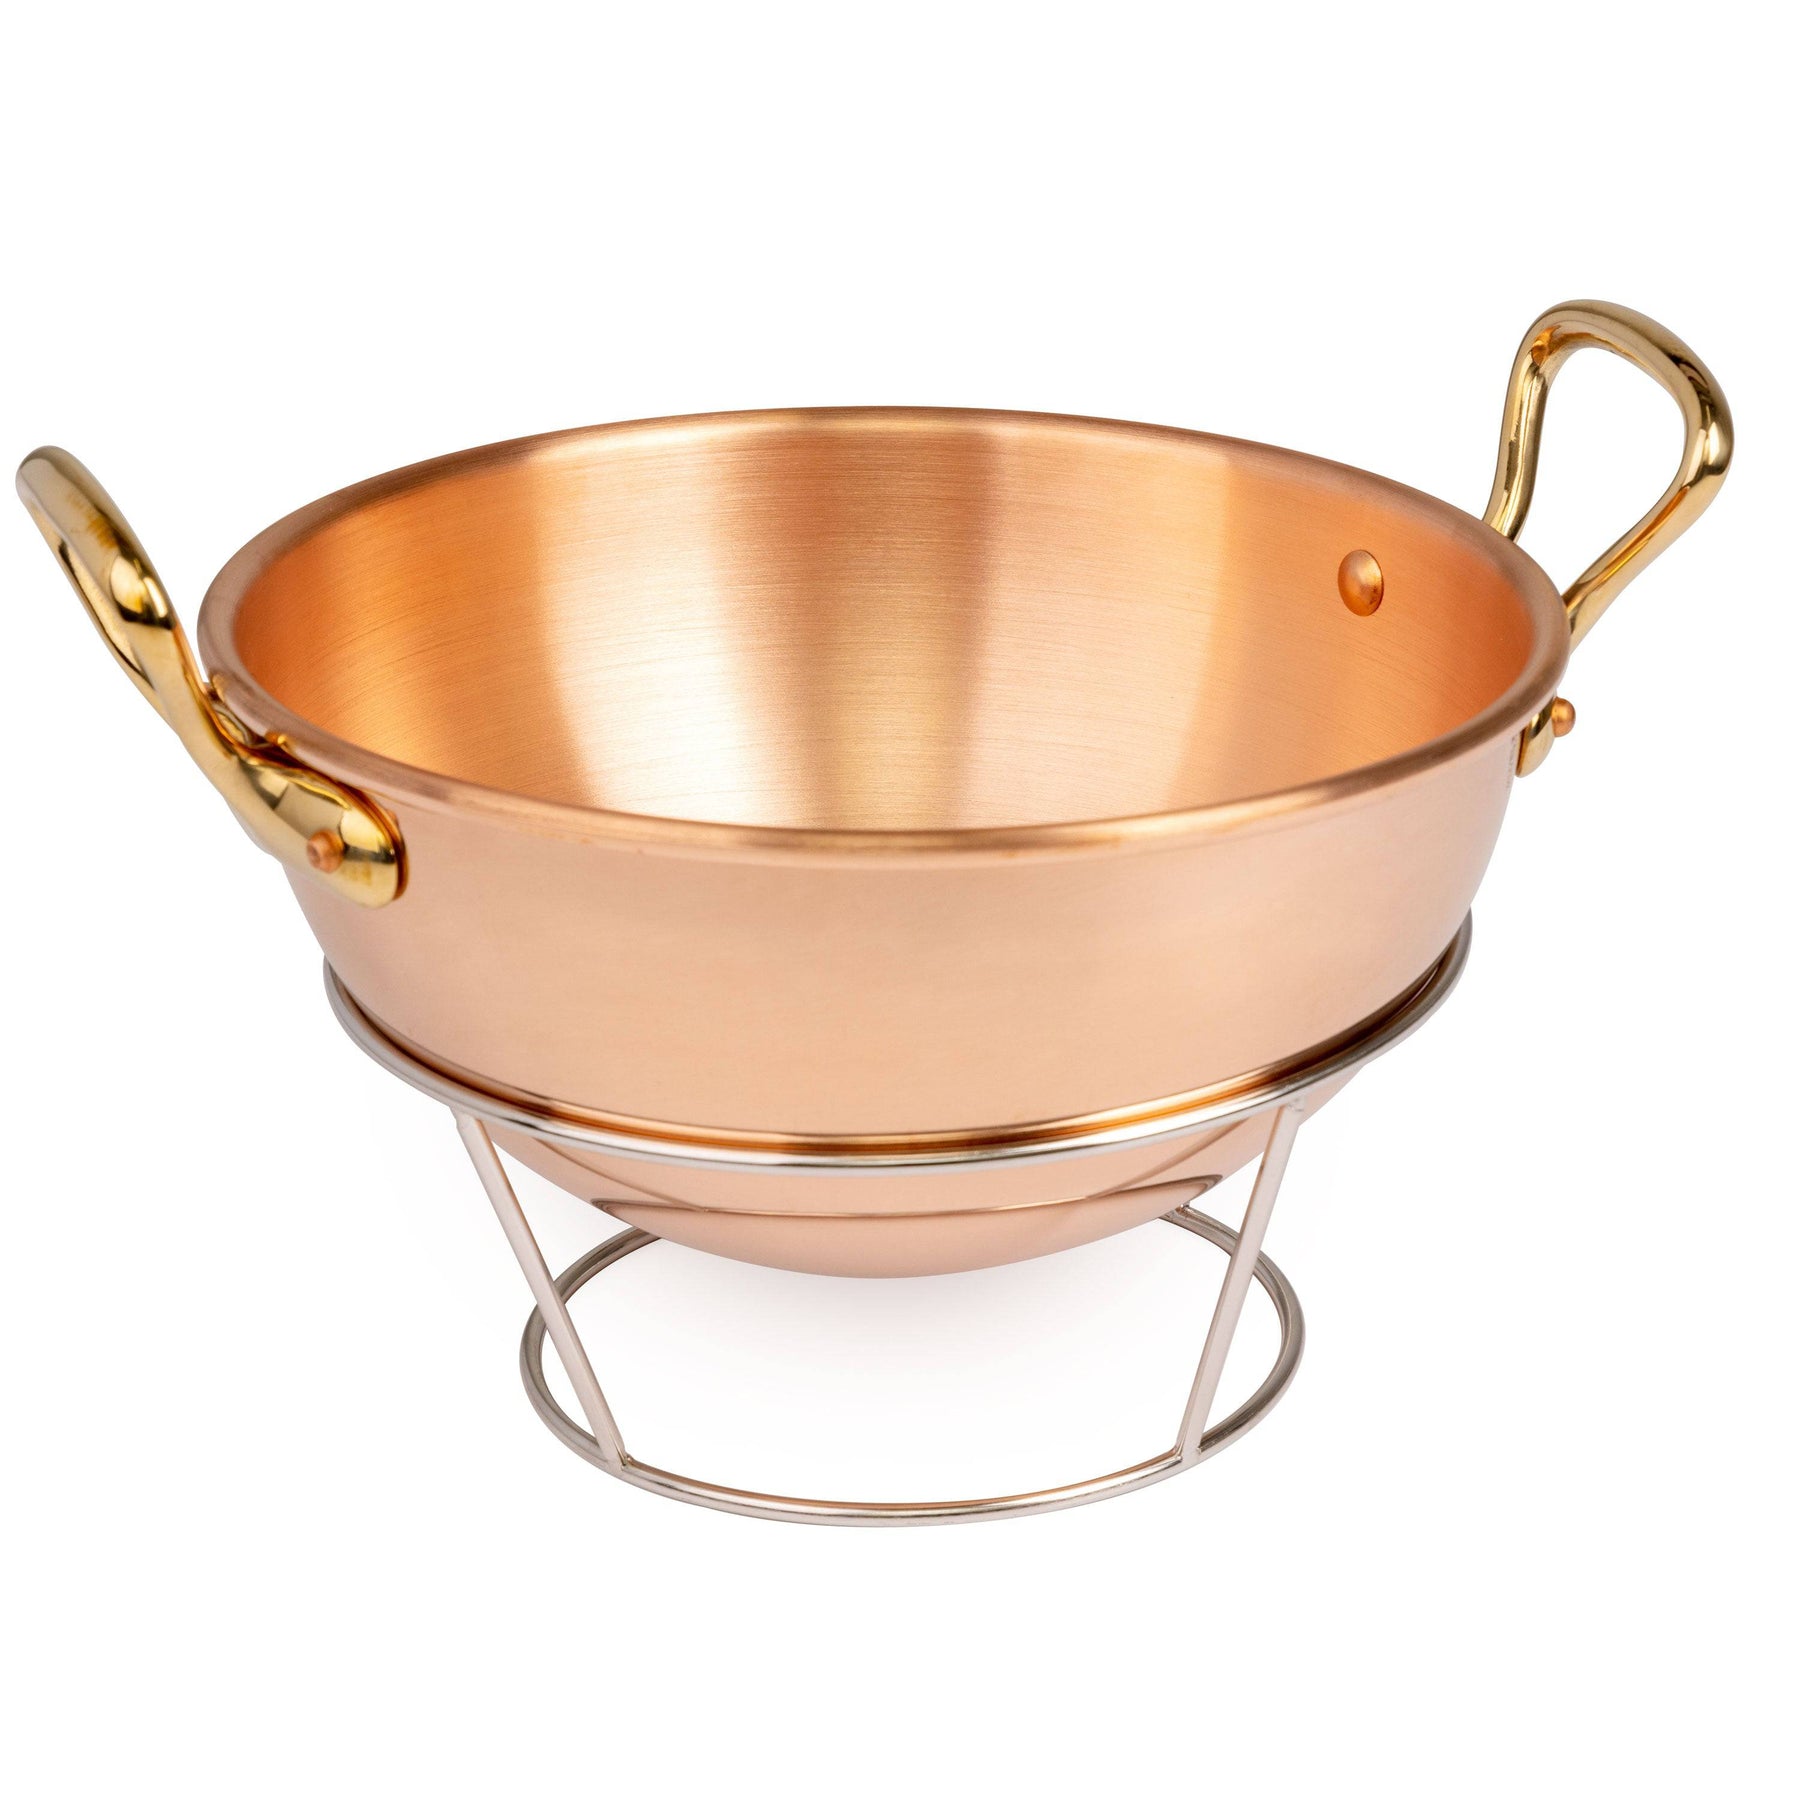 https://www.outletbakeware.com/wp-content/uploads/2023/03/Egg-Bowl-Brass-Handles-with-stand_1800x1800.jpg